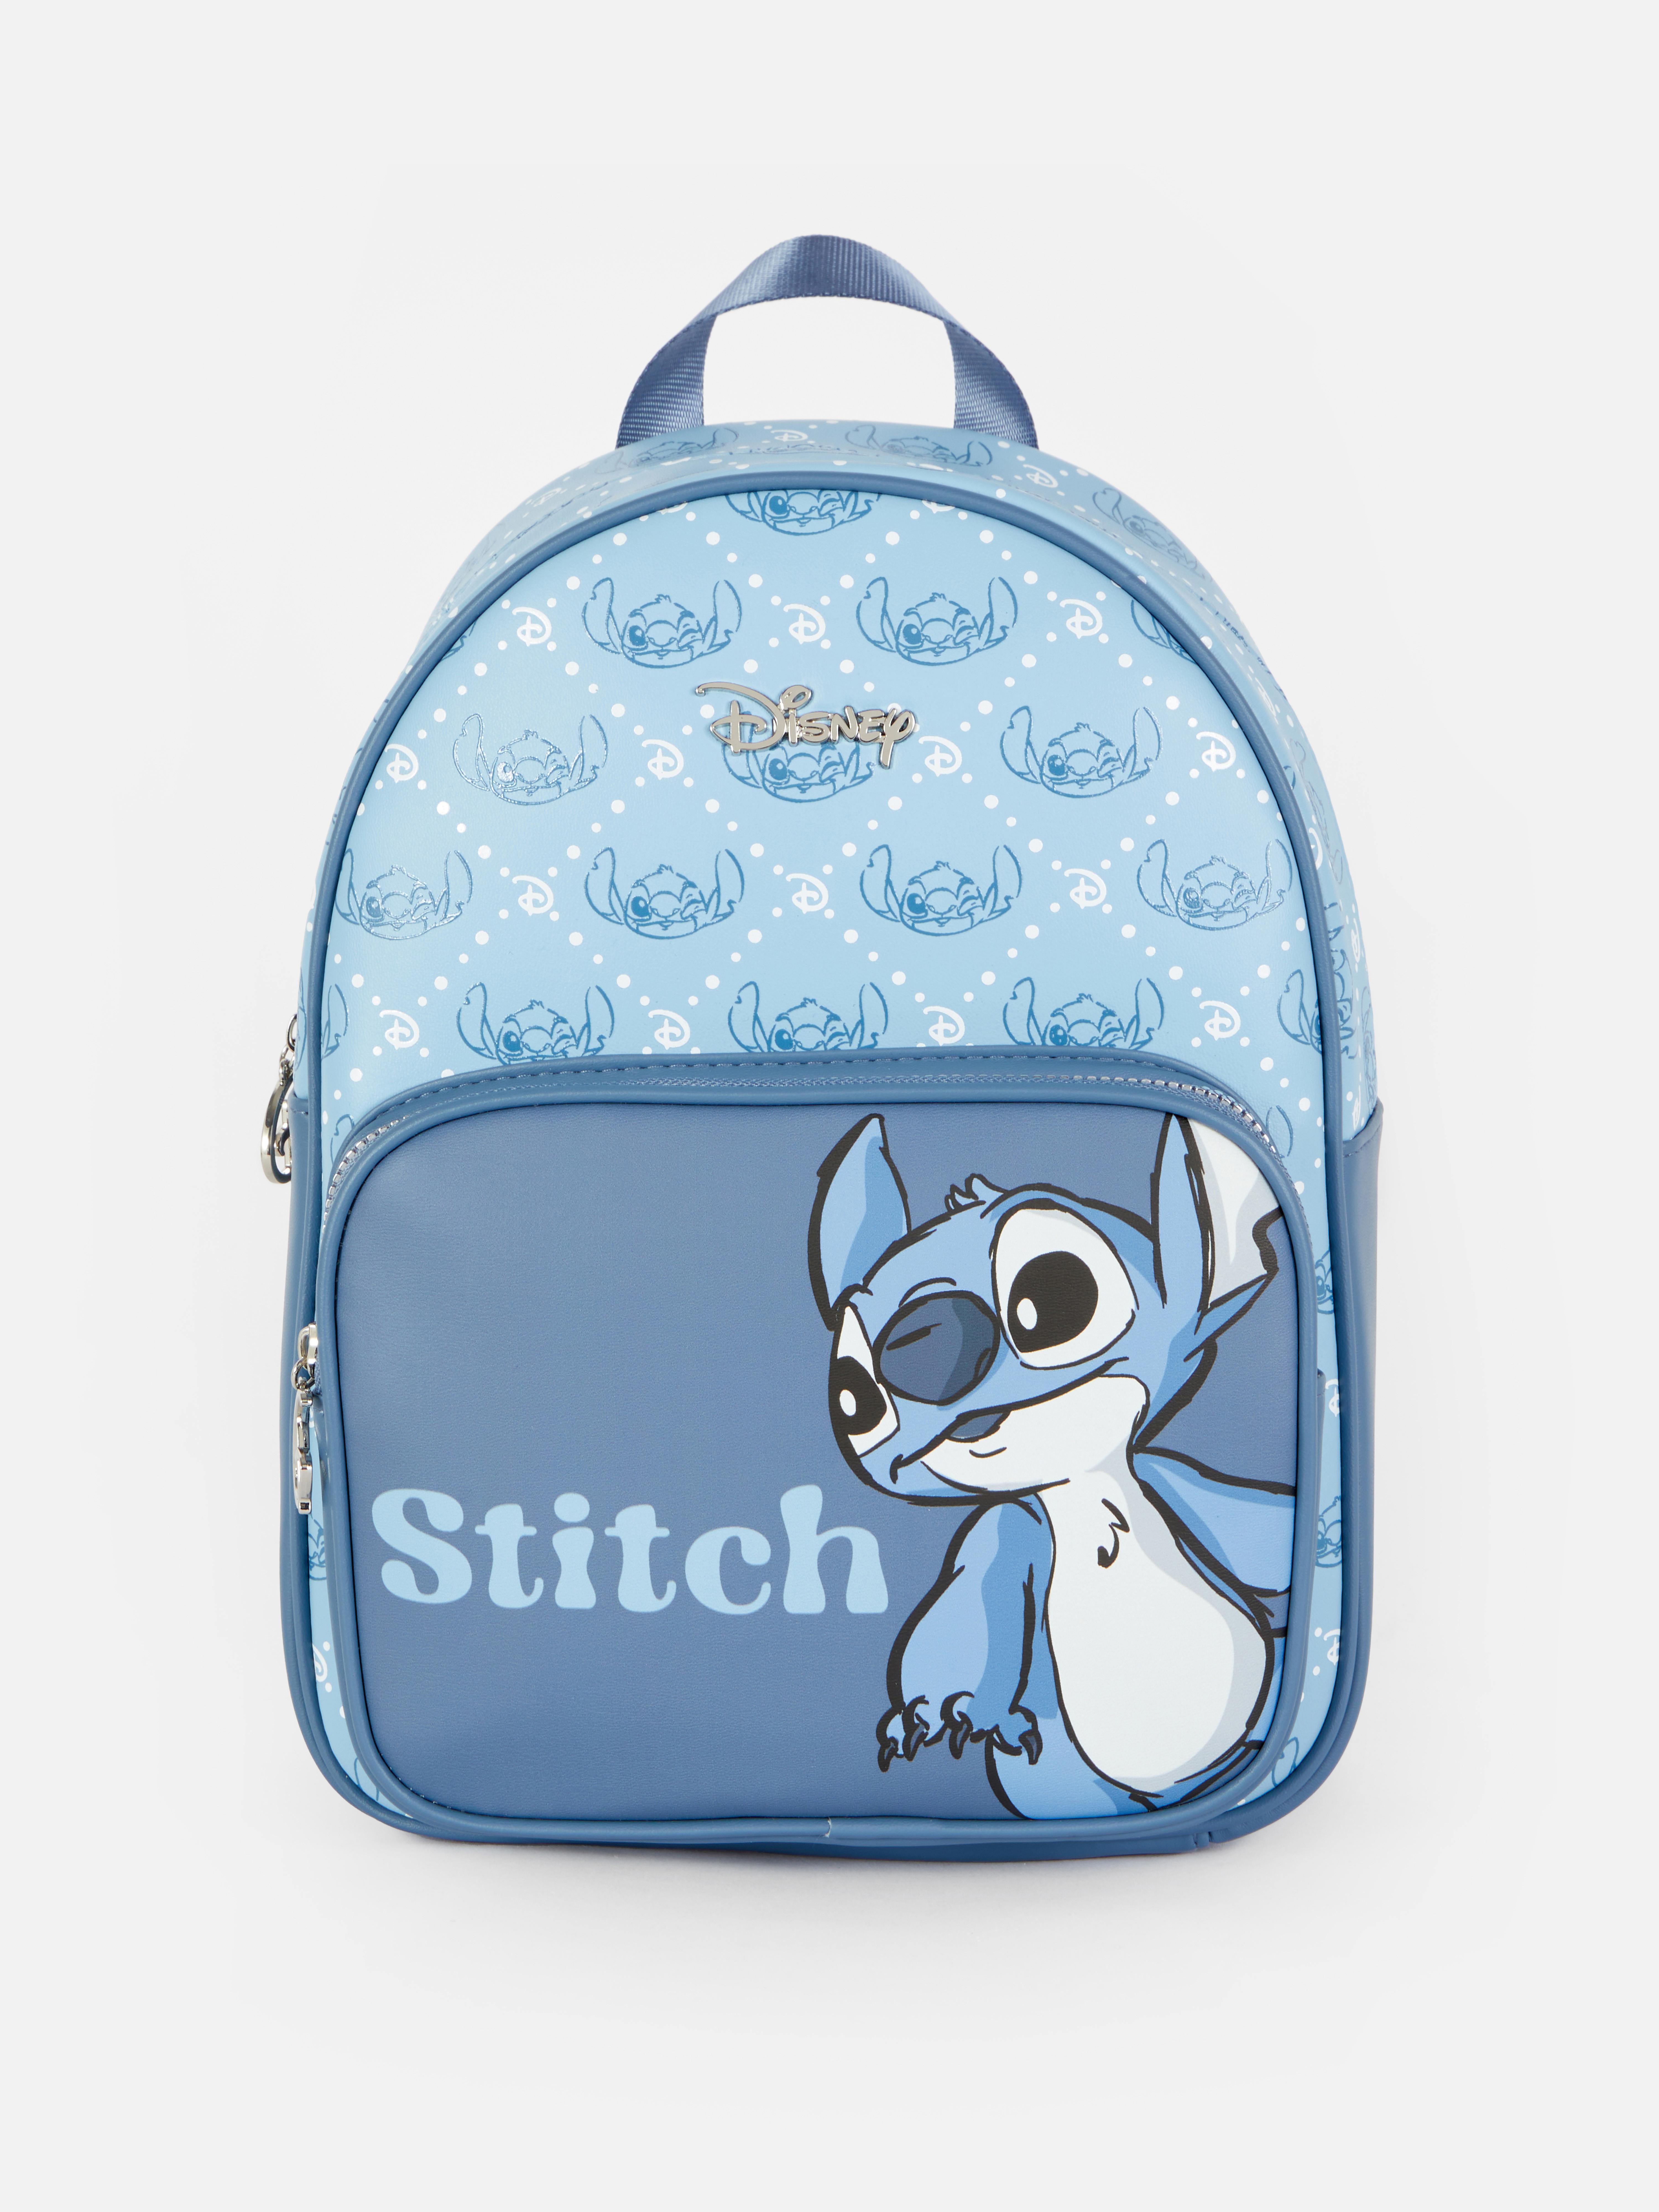 Disney Stitch Collection, Lilo & Stitch Clothing and Accessories